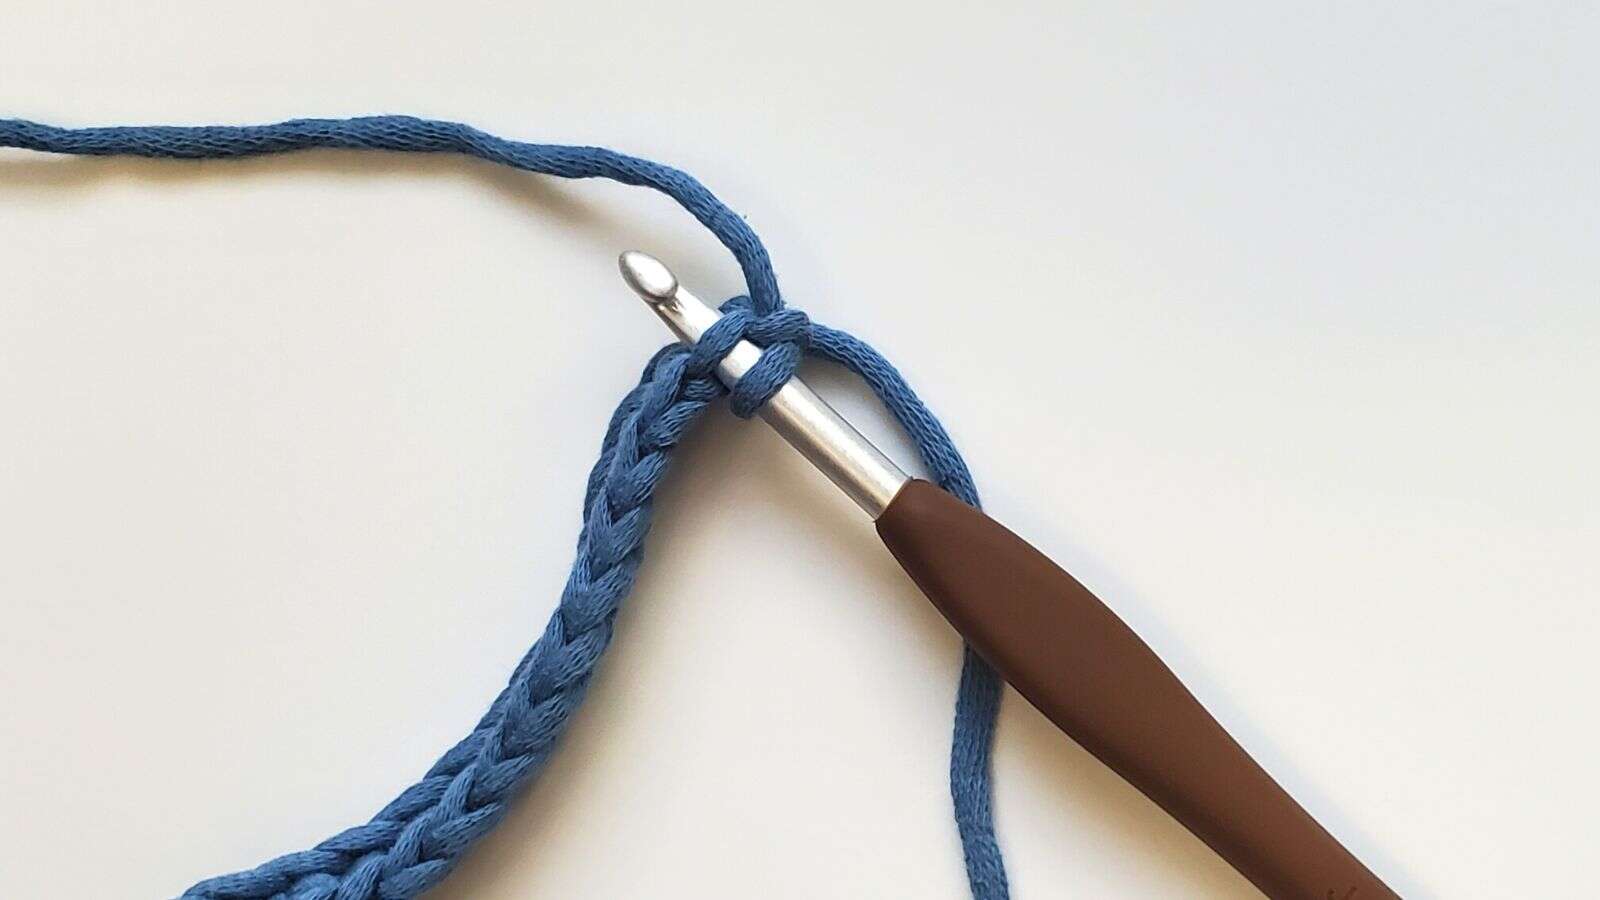 crochet hook inserted into the back loop of the 1st stitch when creating a back loop single crochet stitch